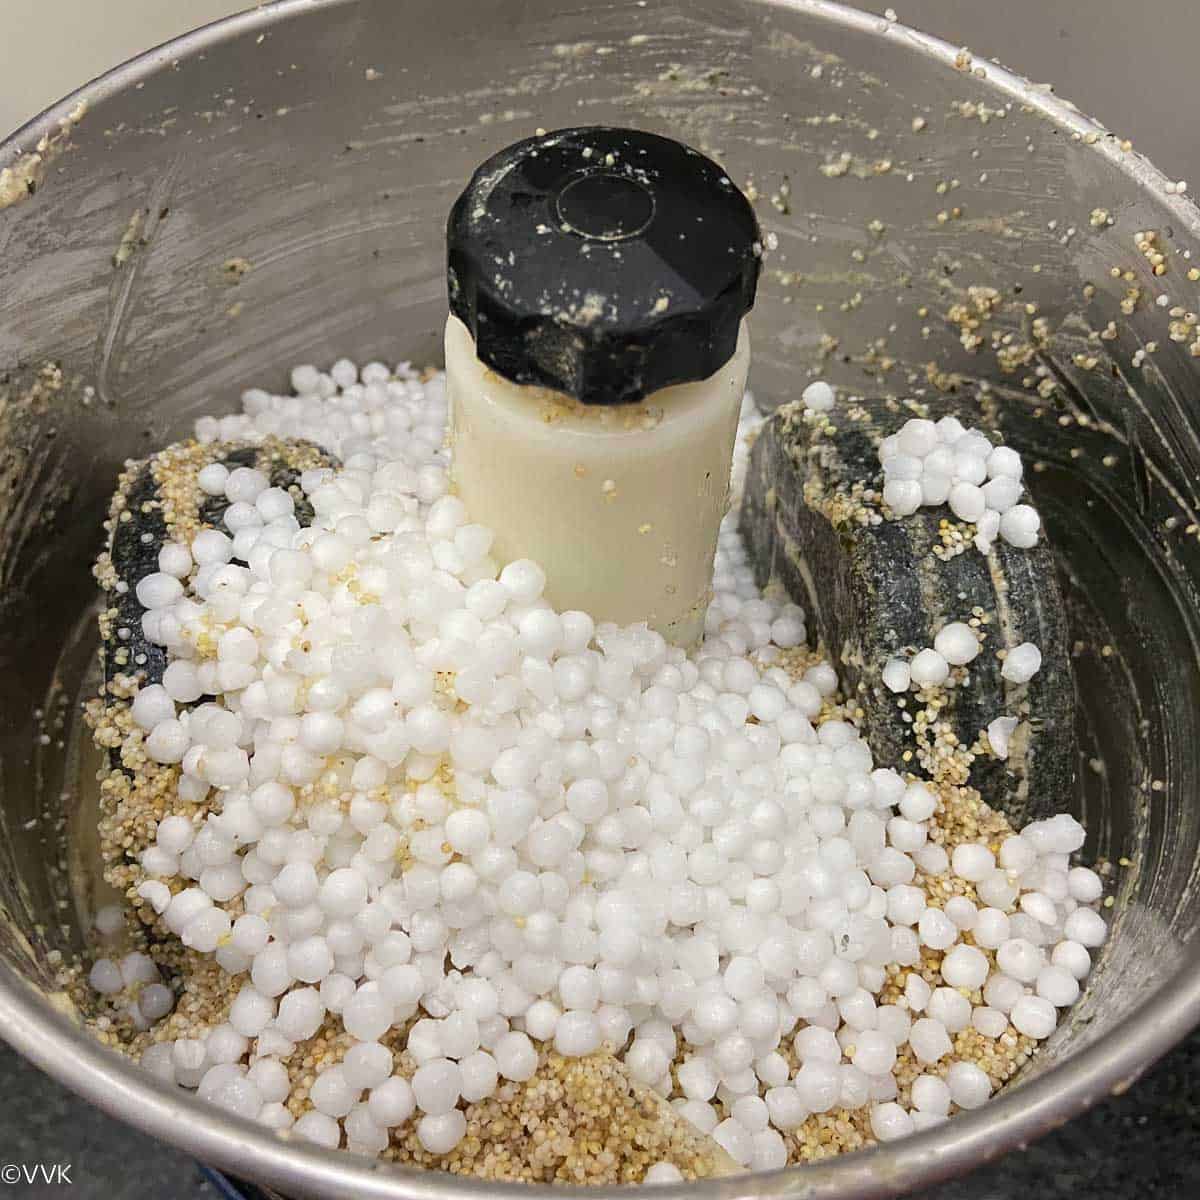 adding millets and tapioca pearls